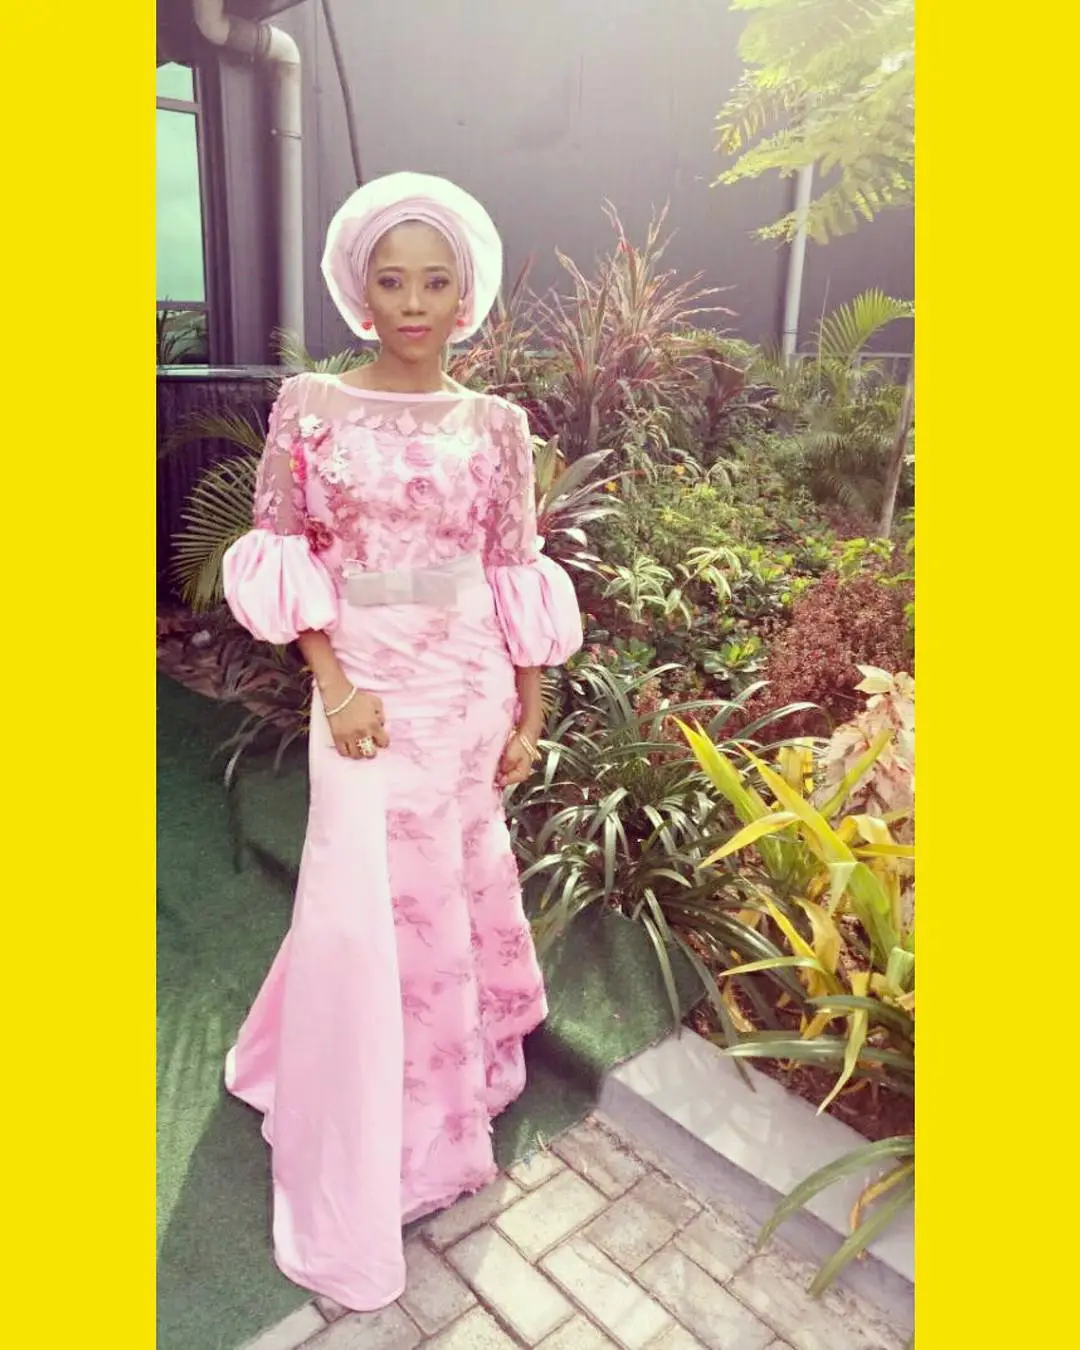 More Gorgeous Asoebi Styles From Banky W Wedding Pictures 2017 #BAAD2017